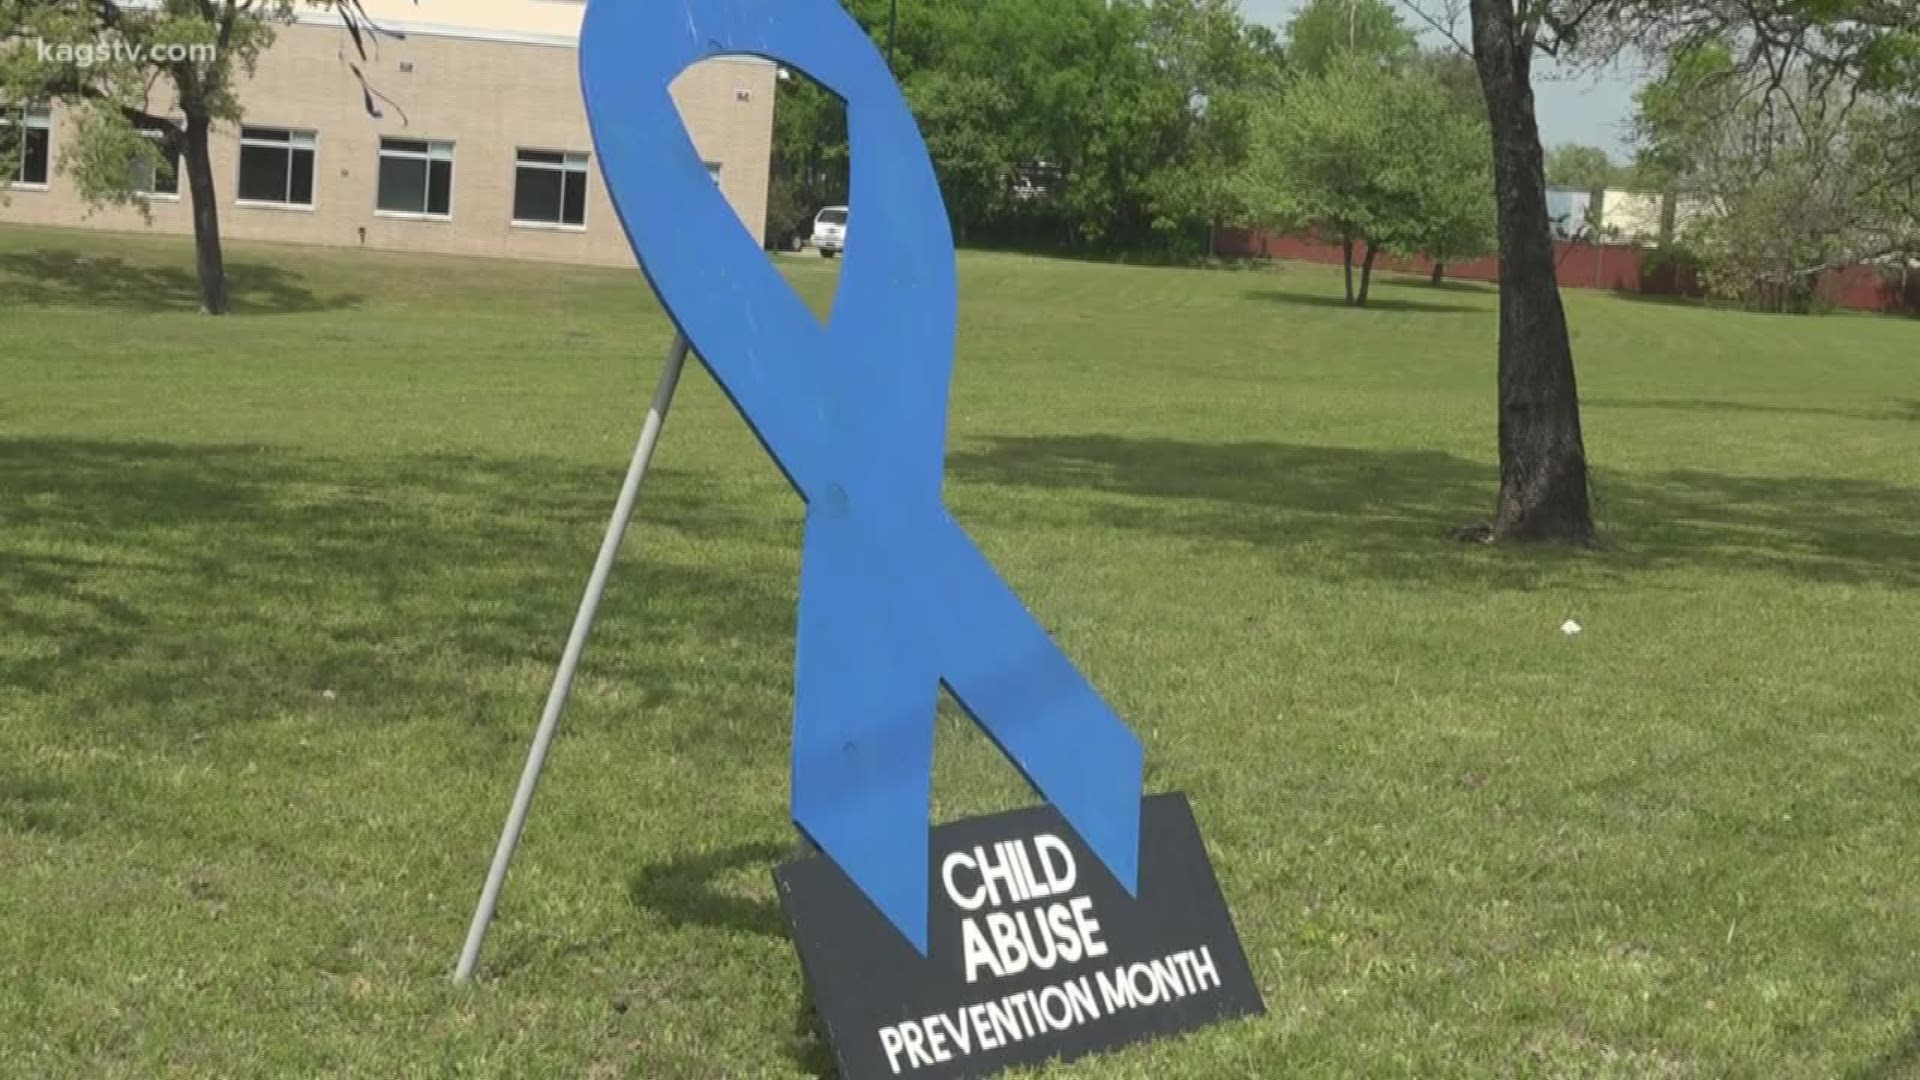 Scotty's House and members of Brazos County law enforcement commemorated Child Abuse Prevention Month with a special display.